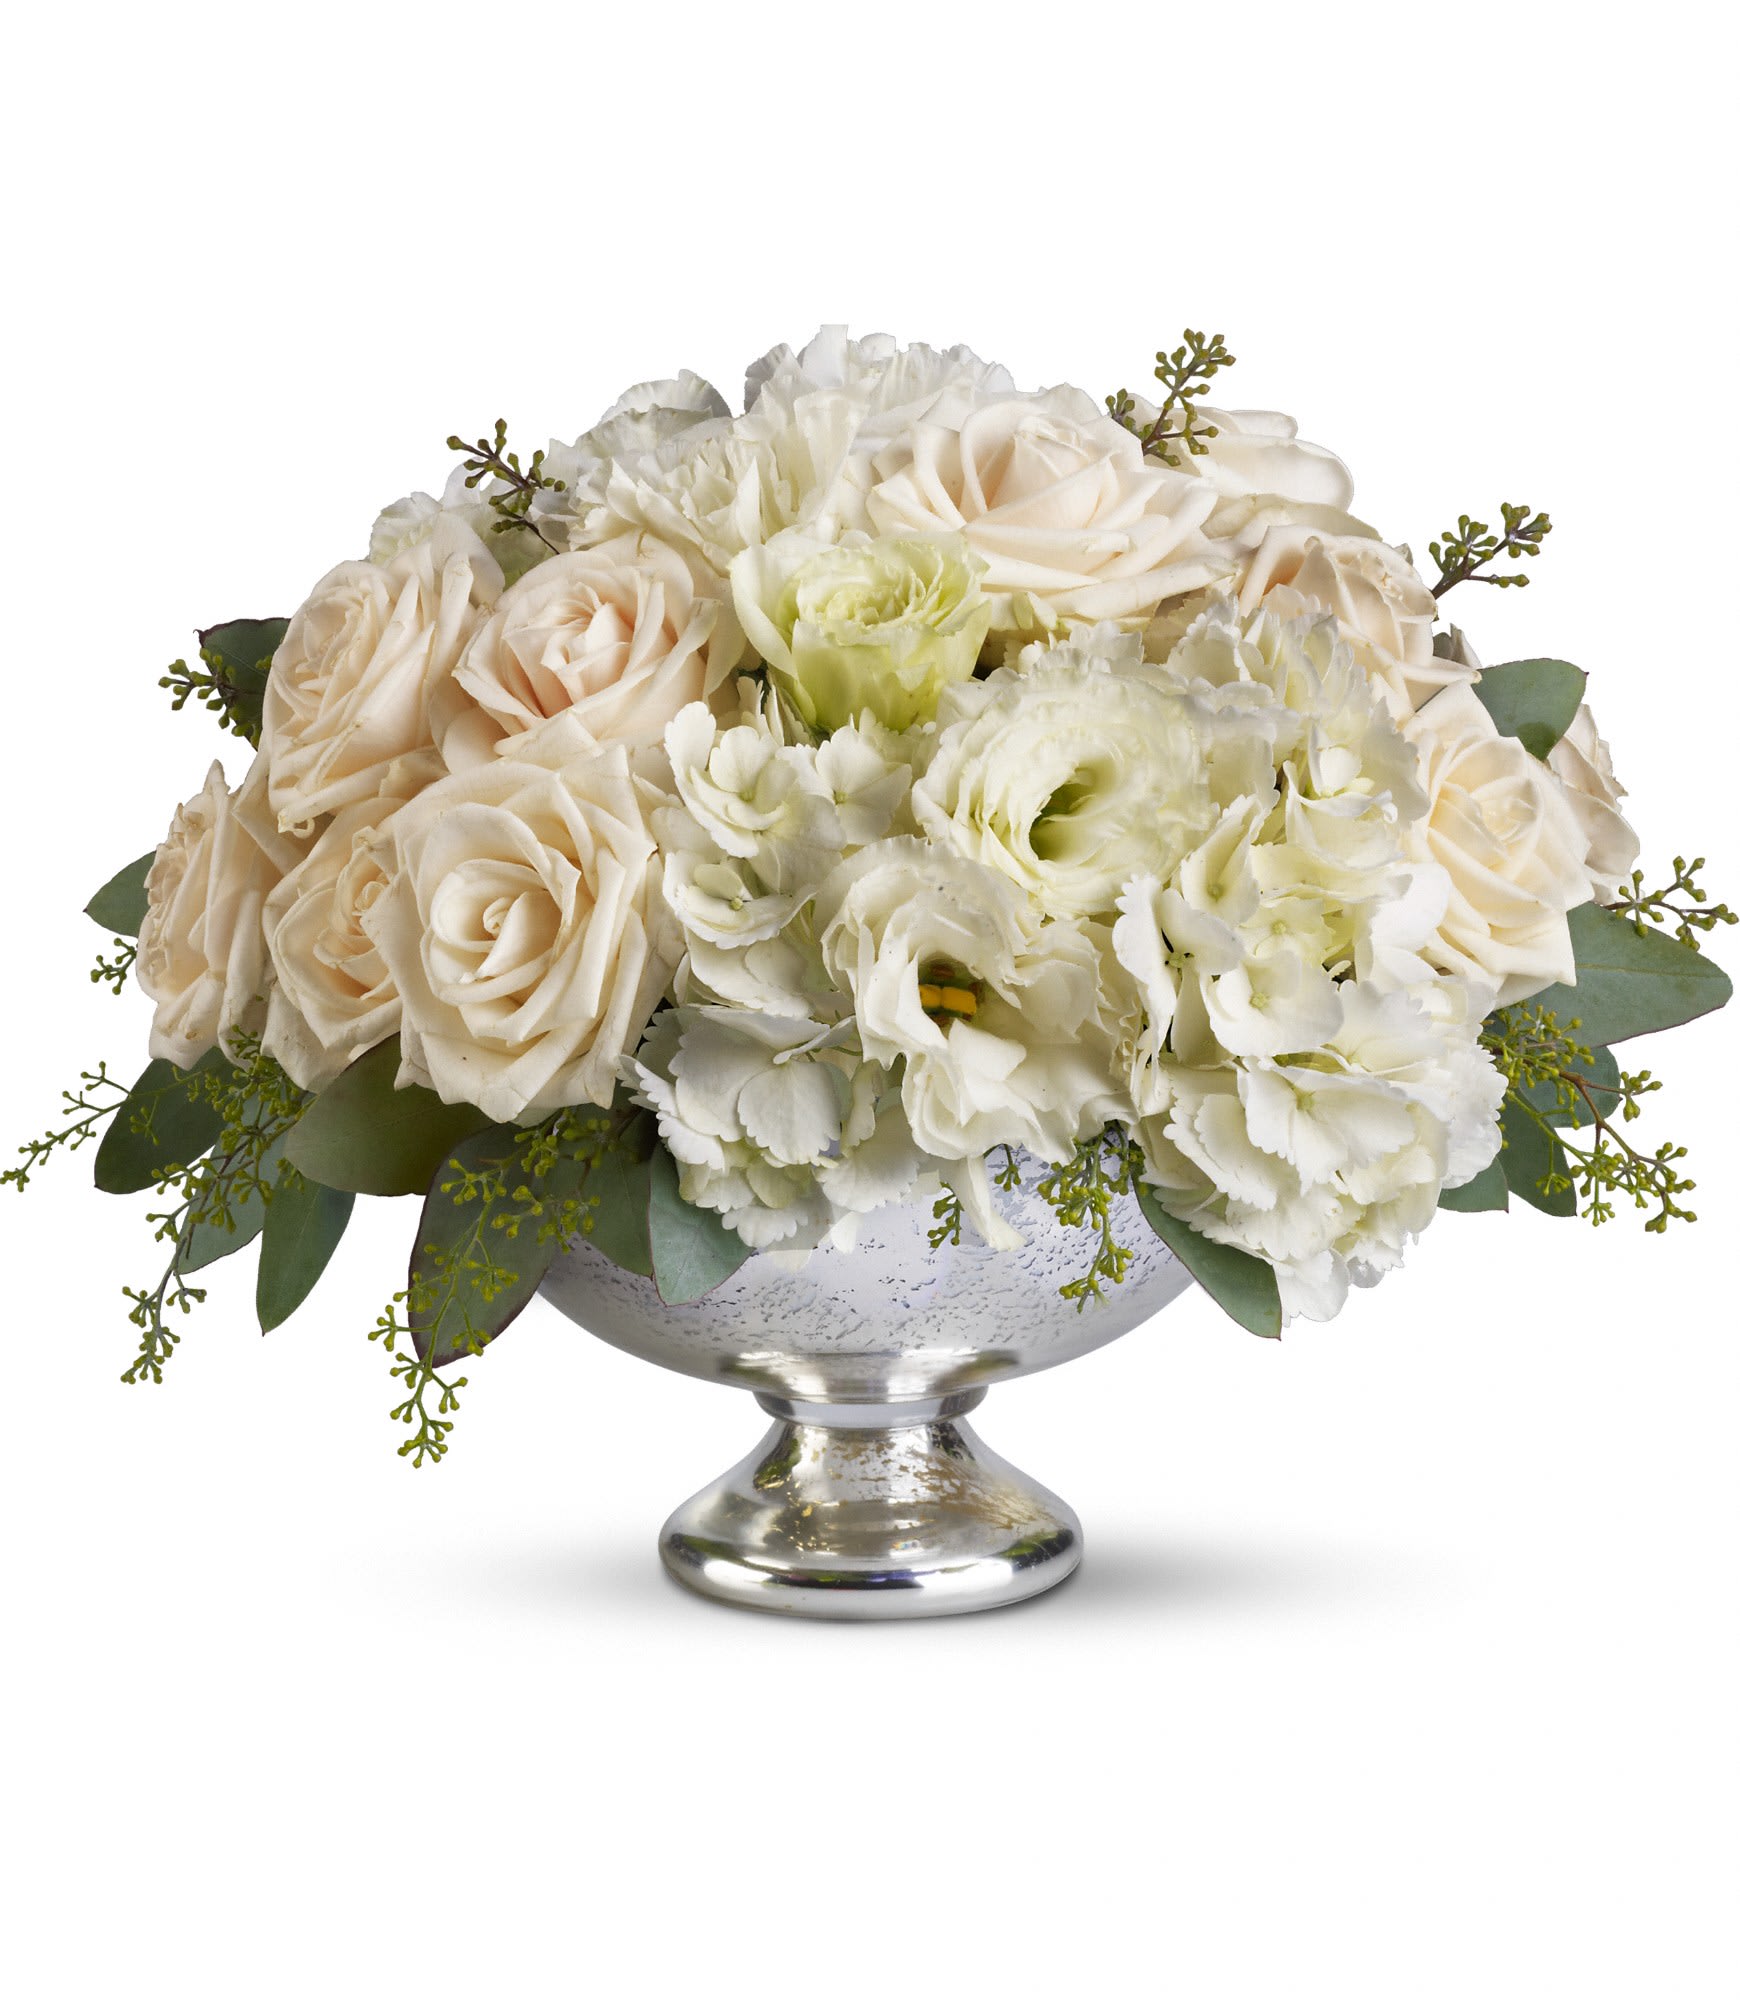 Teleflora's Park Avenue Centerpiece  - Treat your guests to Park Avenue elegance with this dazzling arrangement of crÃ¨me roses, white hydrangea and white lisianthus presented in a brilliant Mercury Glass Bowl. It's a lovely choice for any special occasion, from weddings to anniversaries.  A beautiful Mercury Glass Bowl presents a soft mix of crÃ¨me roses, white hydrangea and white lisianthus accented with seeded eucalyptus.  Approximately 13 1/2&quot; W x 10 1/4&quot; H  Orientation: All-Around      As Shown : T188-1A  